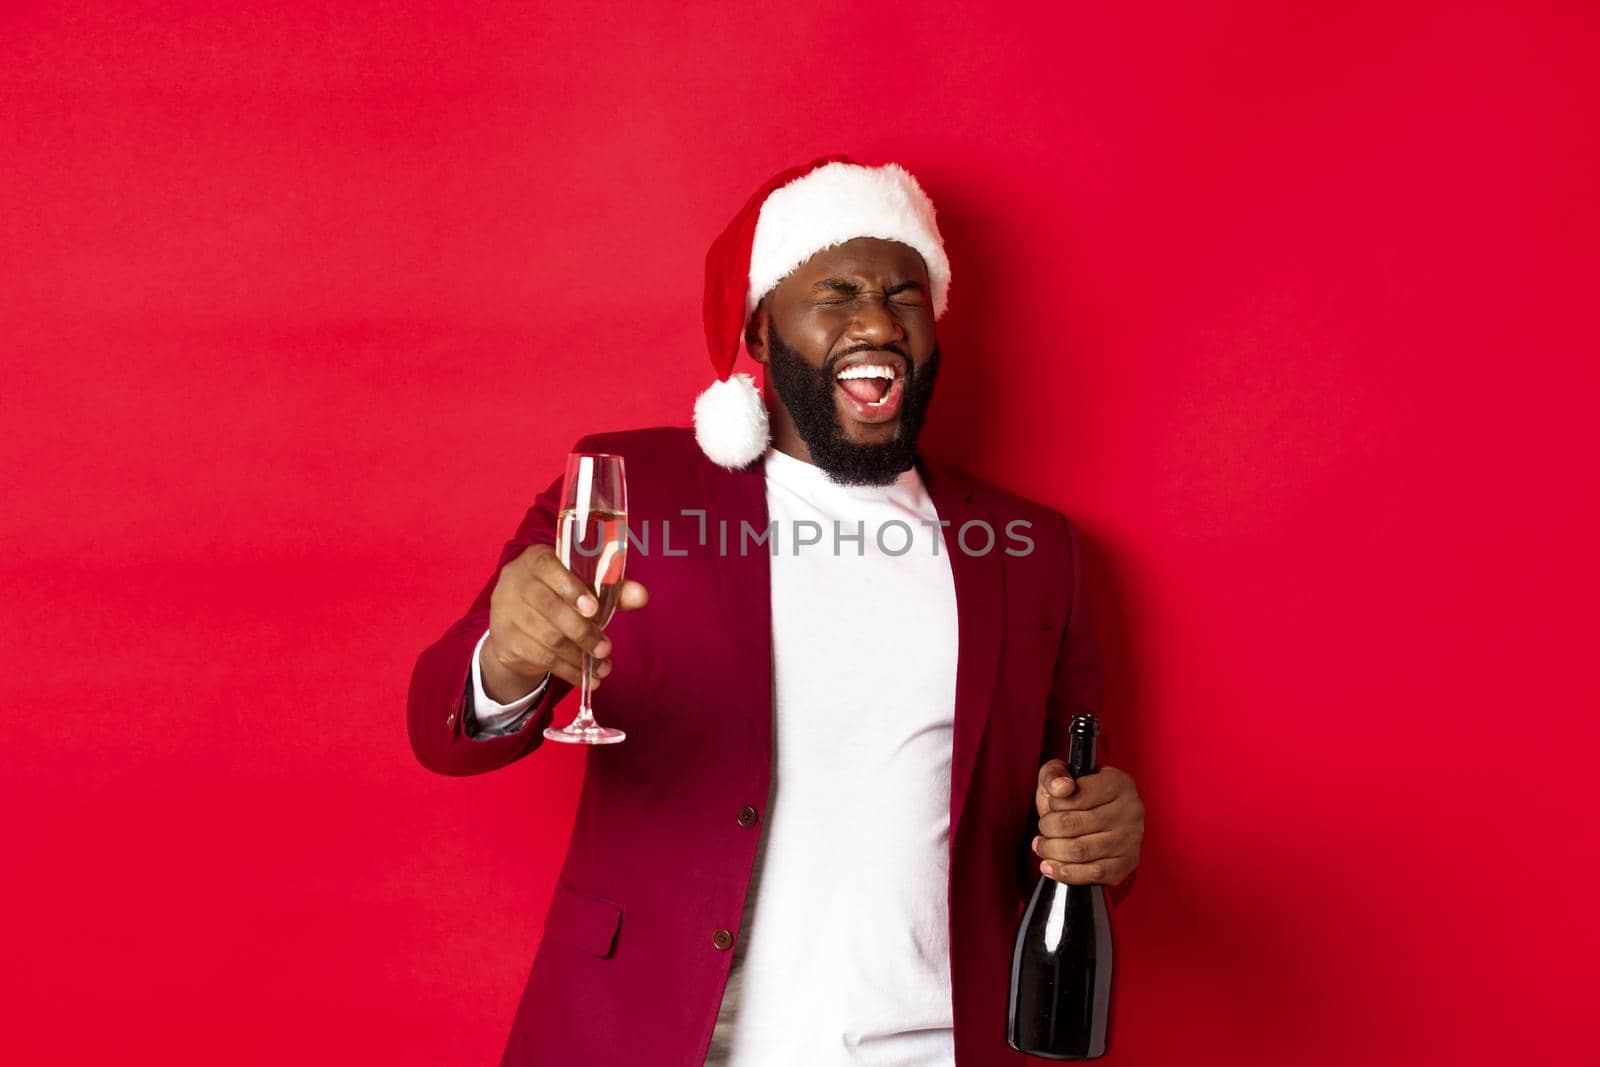 Christmas, party and holidays concept. Funny drunk Black man celebrating New Year, laughing and having fun, holding glass and bottle of champagne, red background.